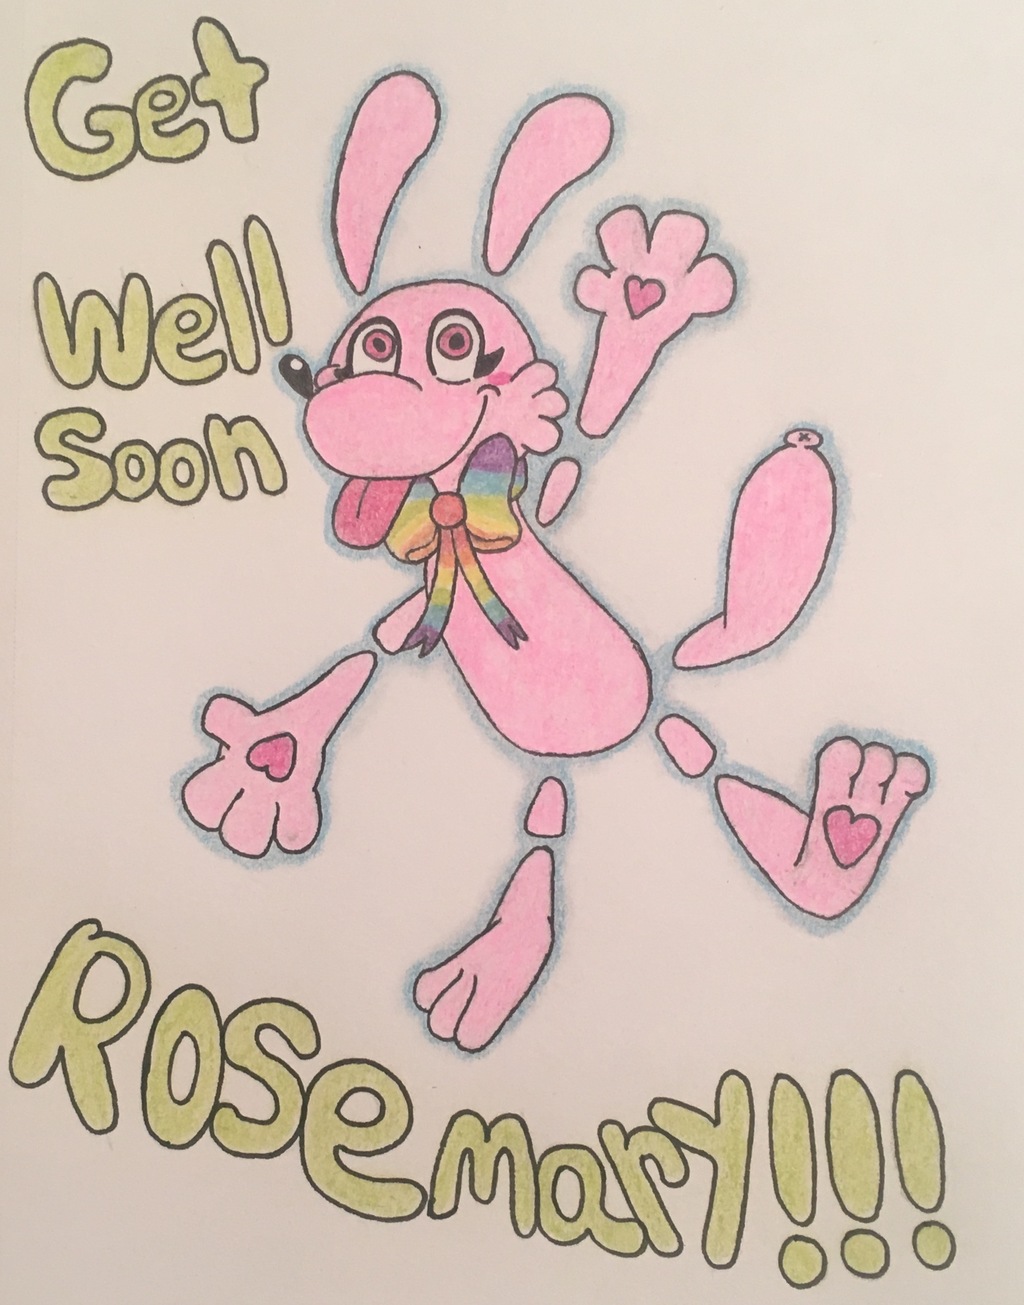 Get Well Soon Rosemary 